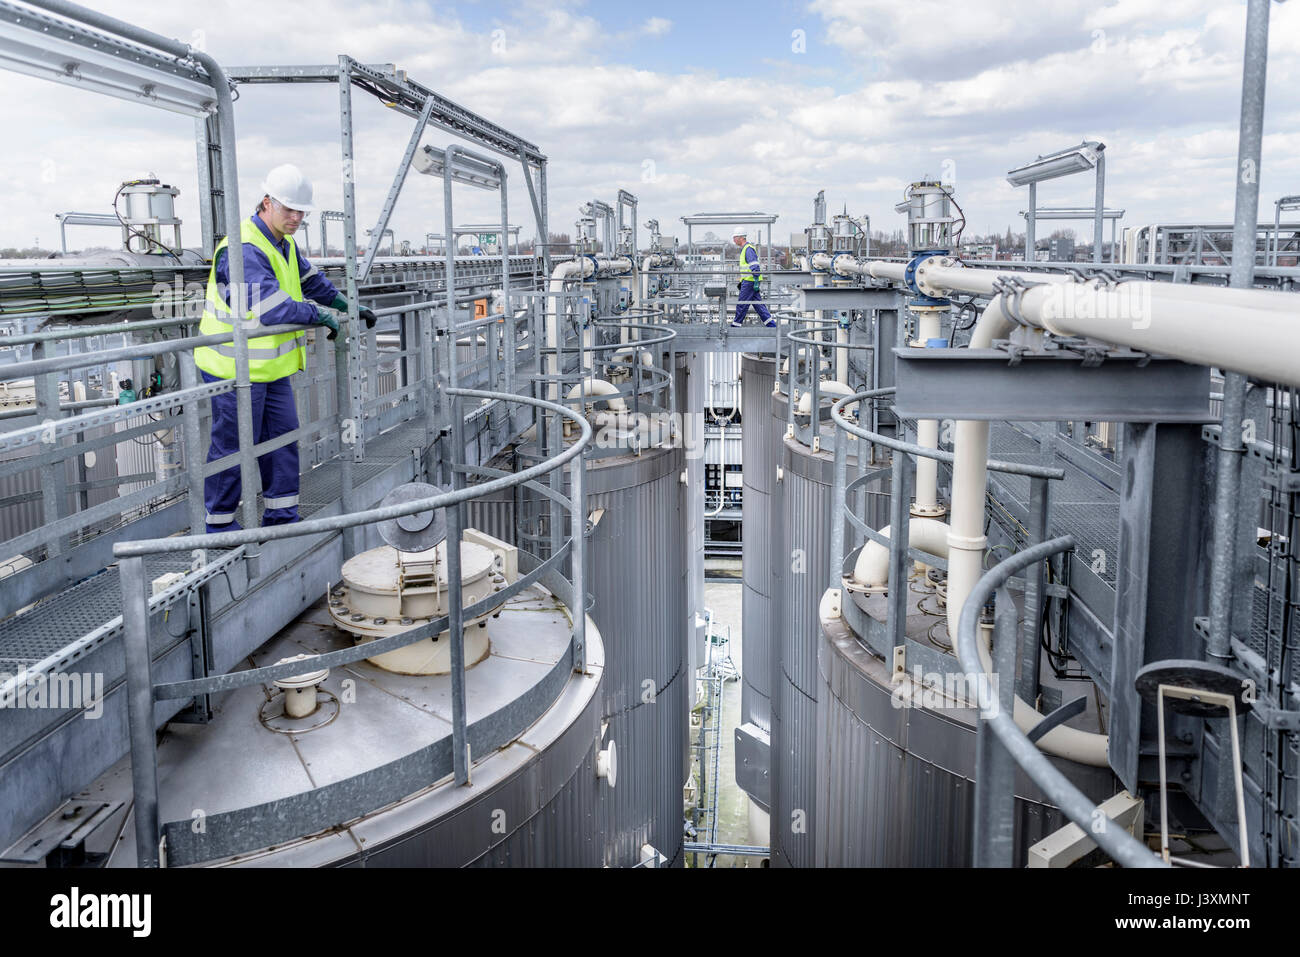 Workers on top of process plant in oil blending factory Stock Photo